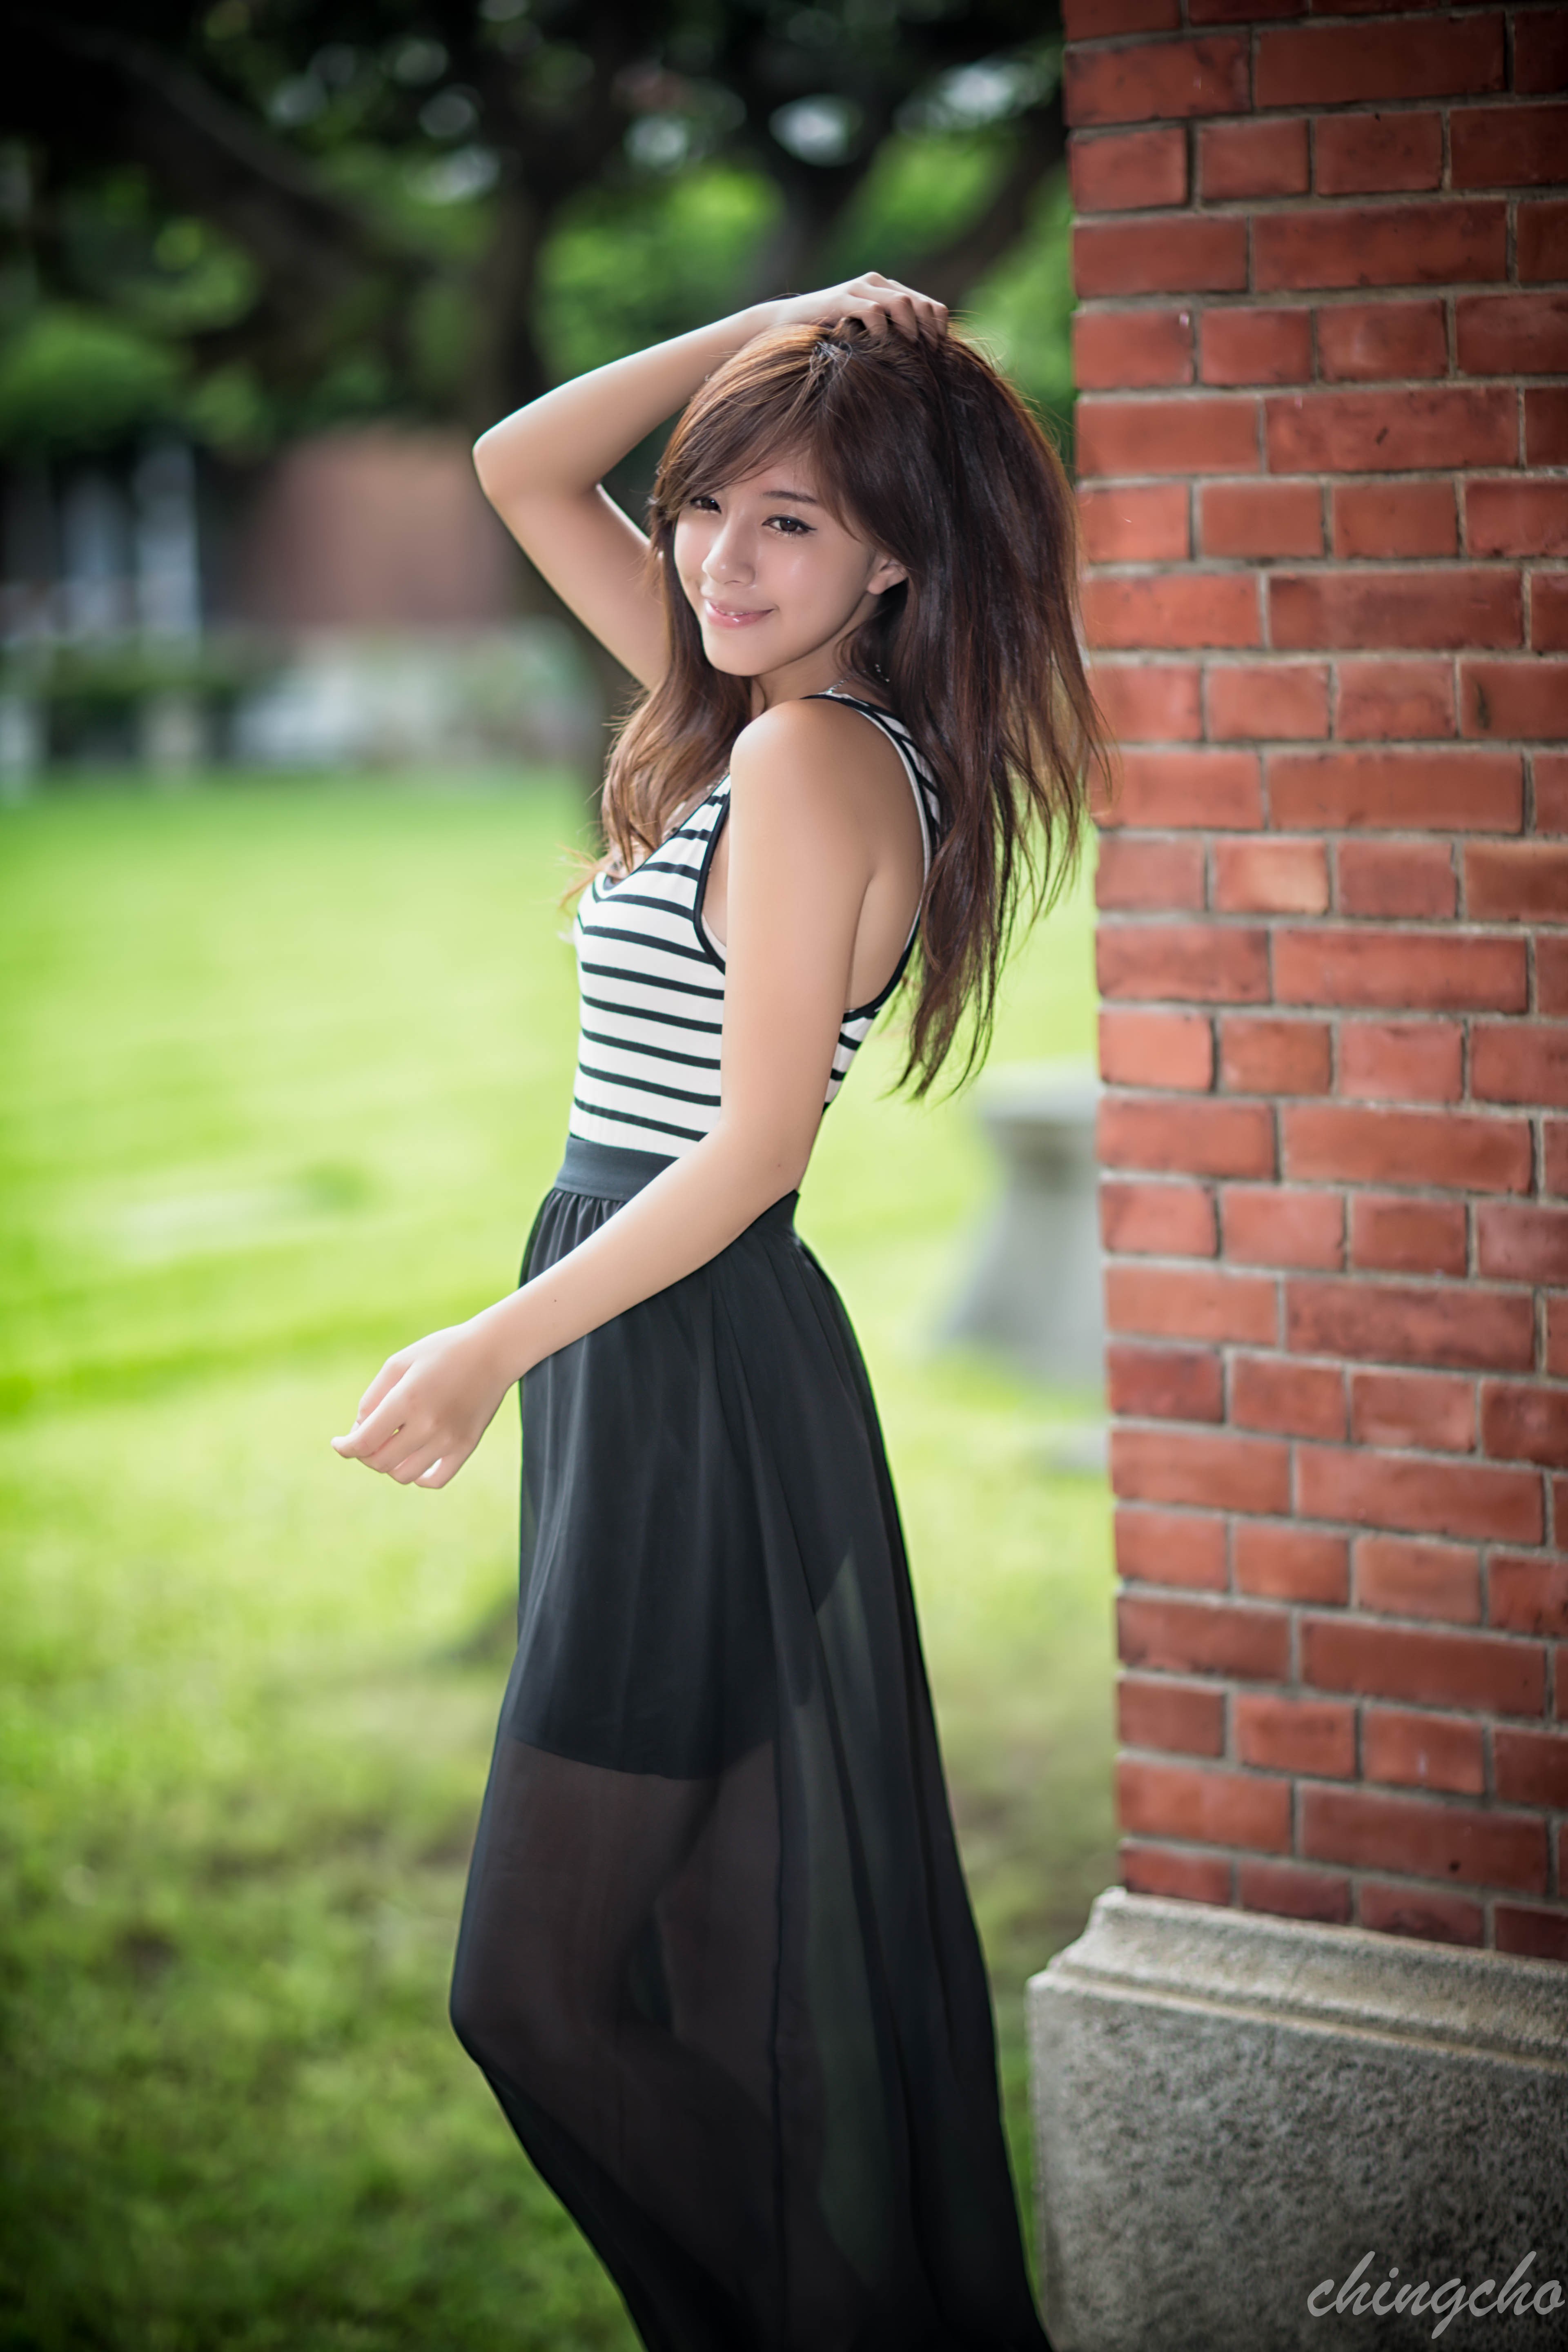 People 3840x5760 chingcho Asian women brunette smiling depth of field arms up urban striped clothing standing women outdoors Chinese women